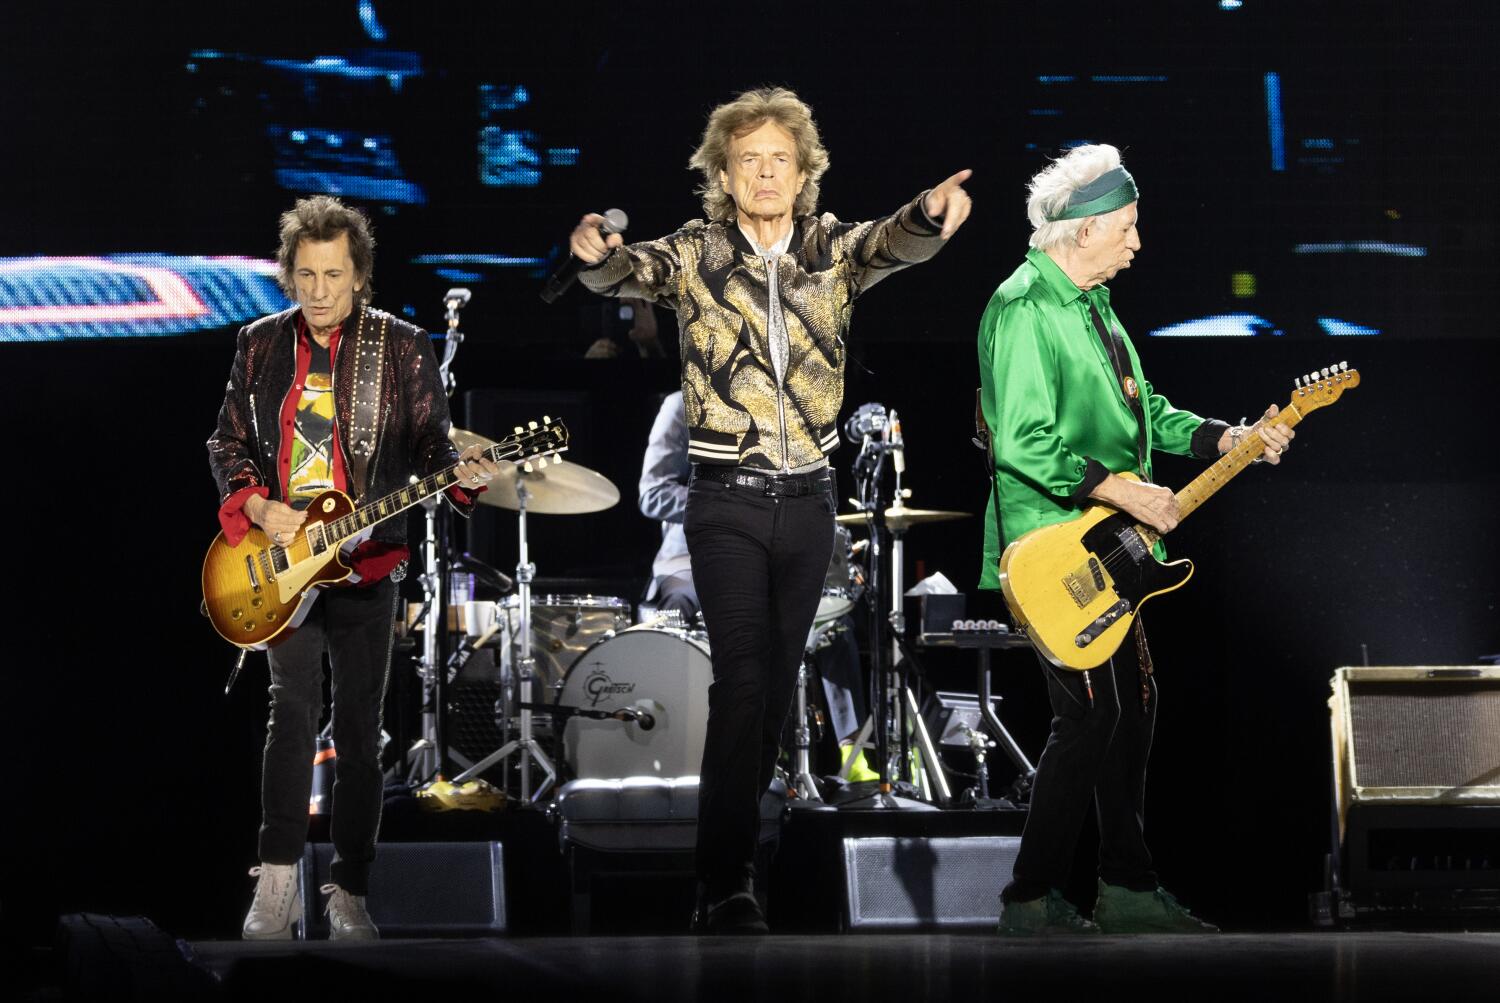 The Rolling Stones, still as dangerous and vital as ever at SoFi Stadium